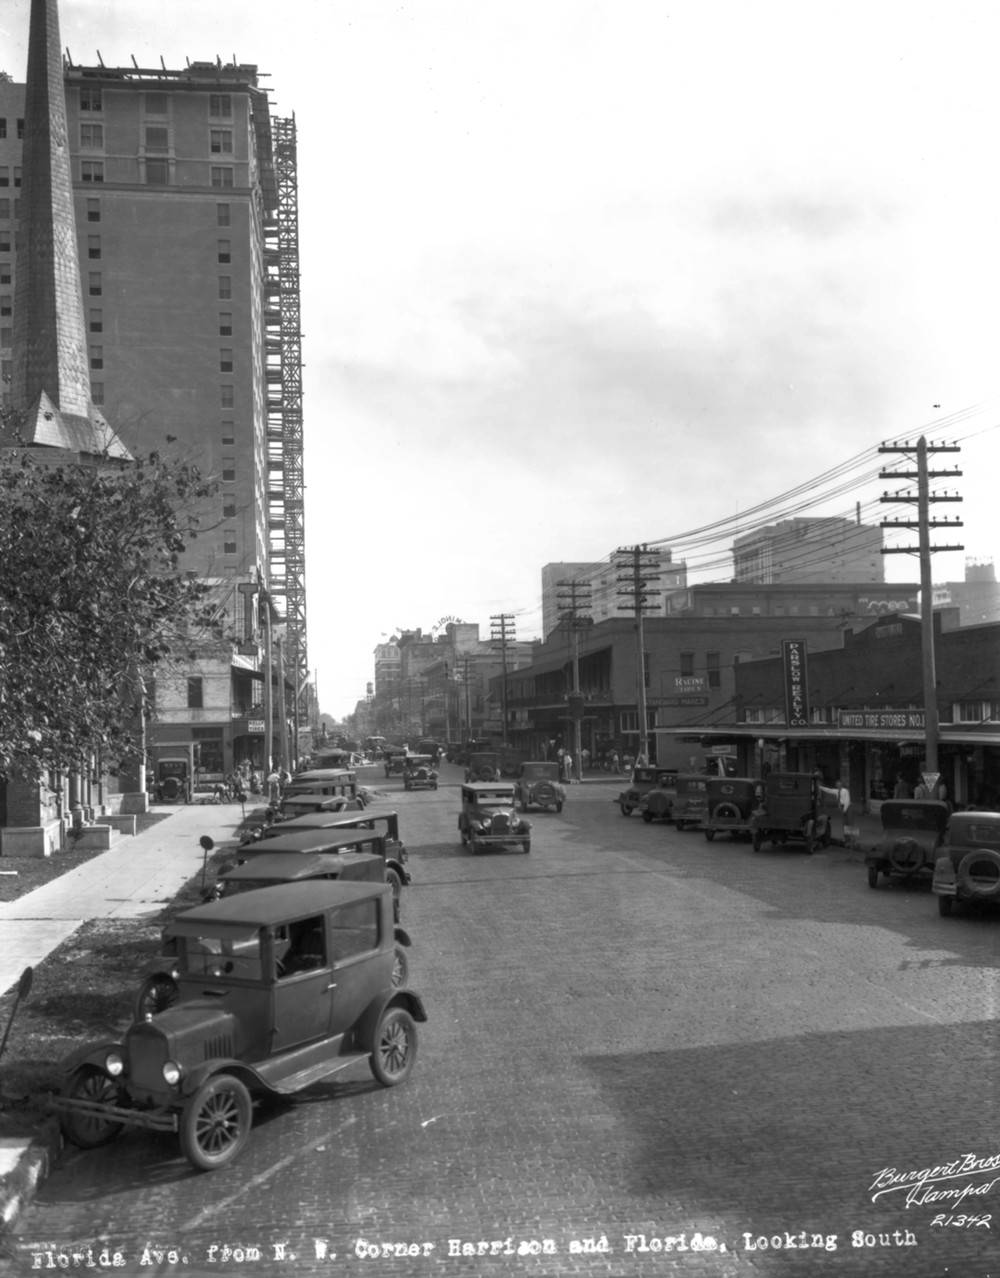 Floridan Hotel, Tampa Florida Street scene, showing the hotel under construction looking south (1926)